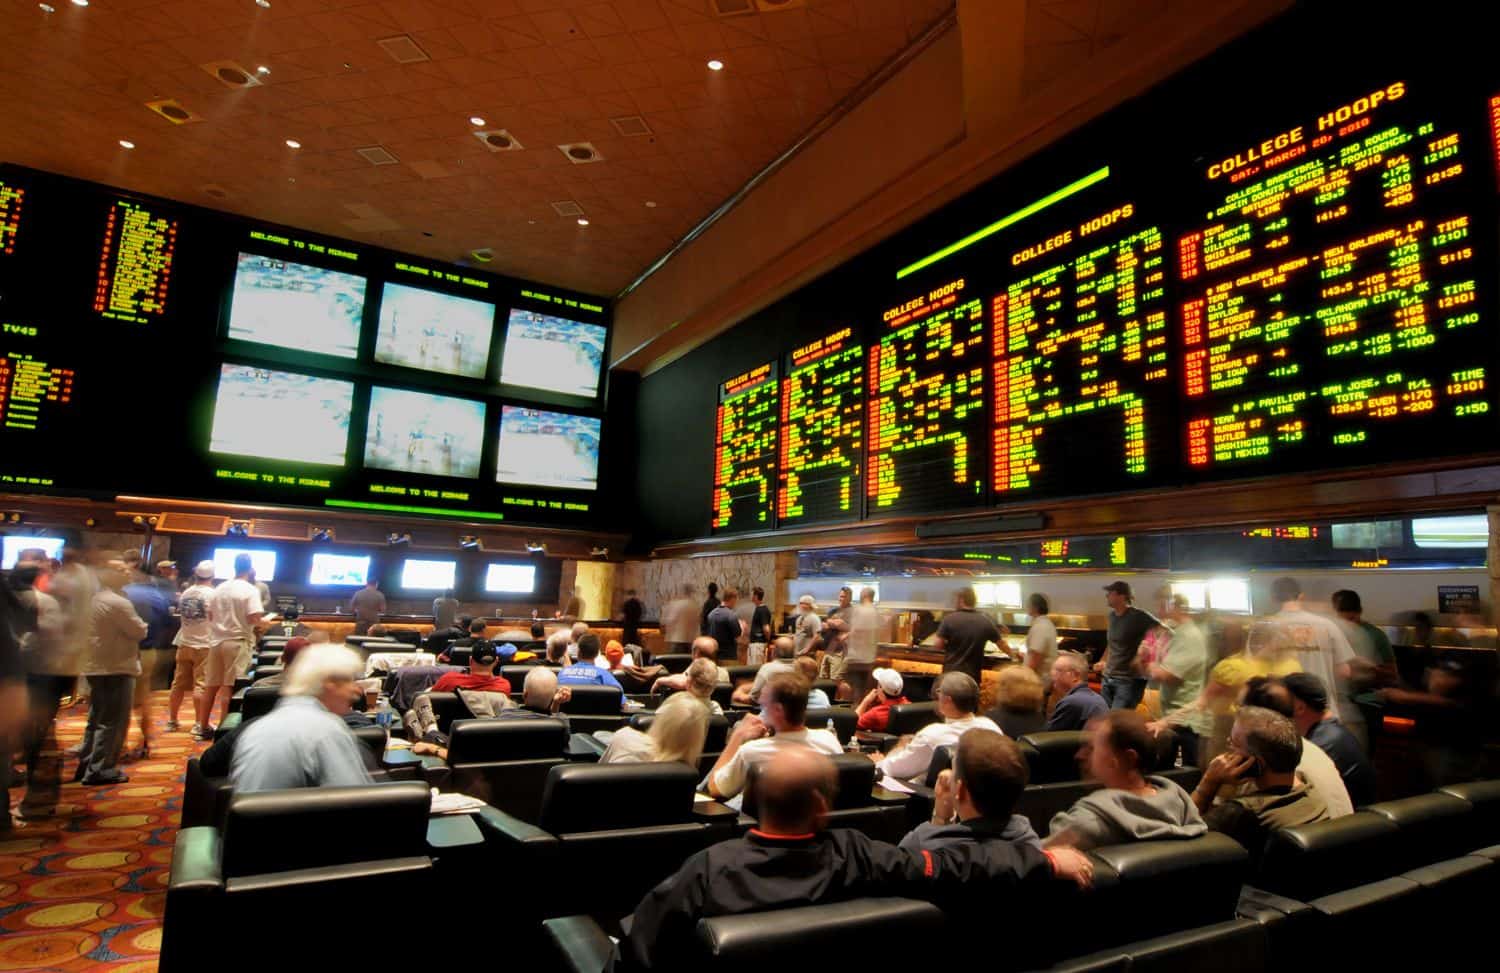 people gathered for sports betting